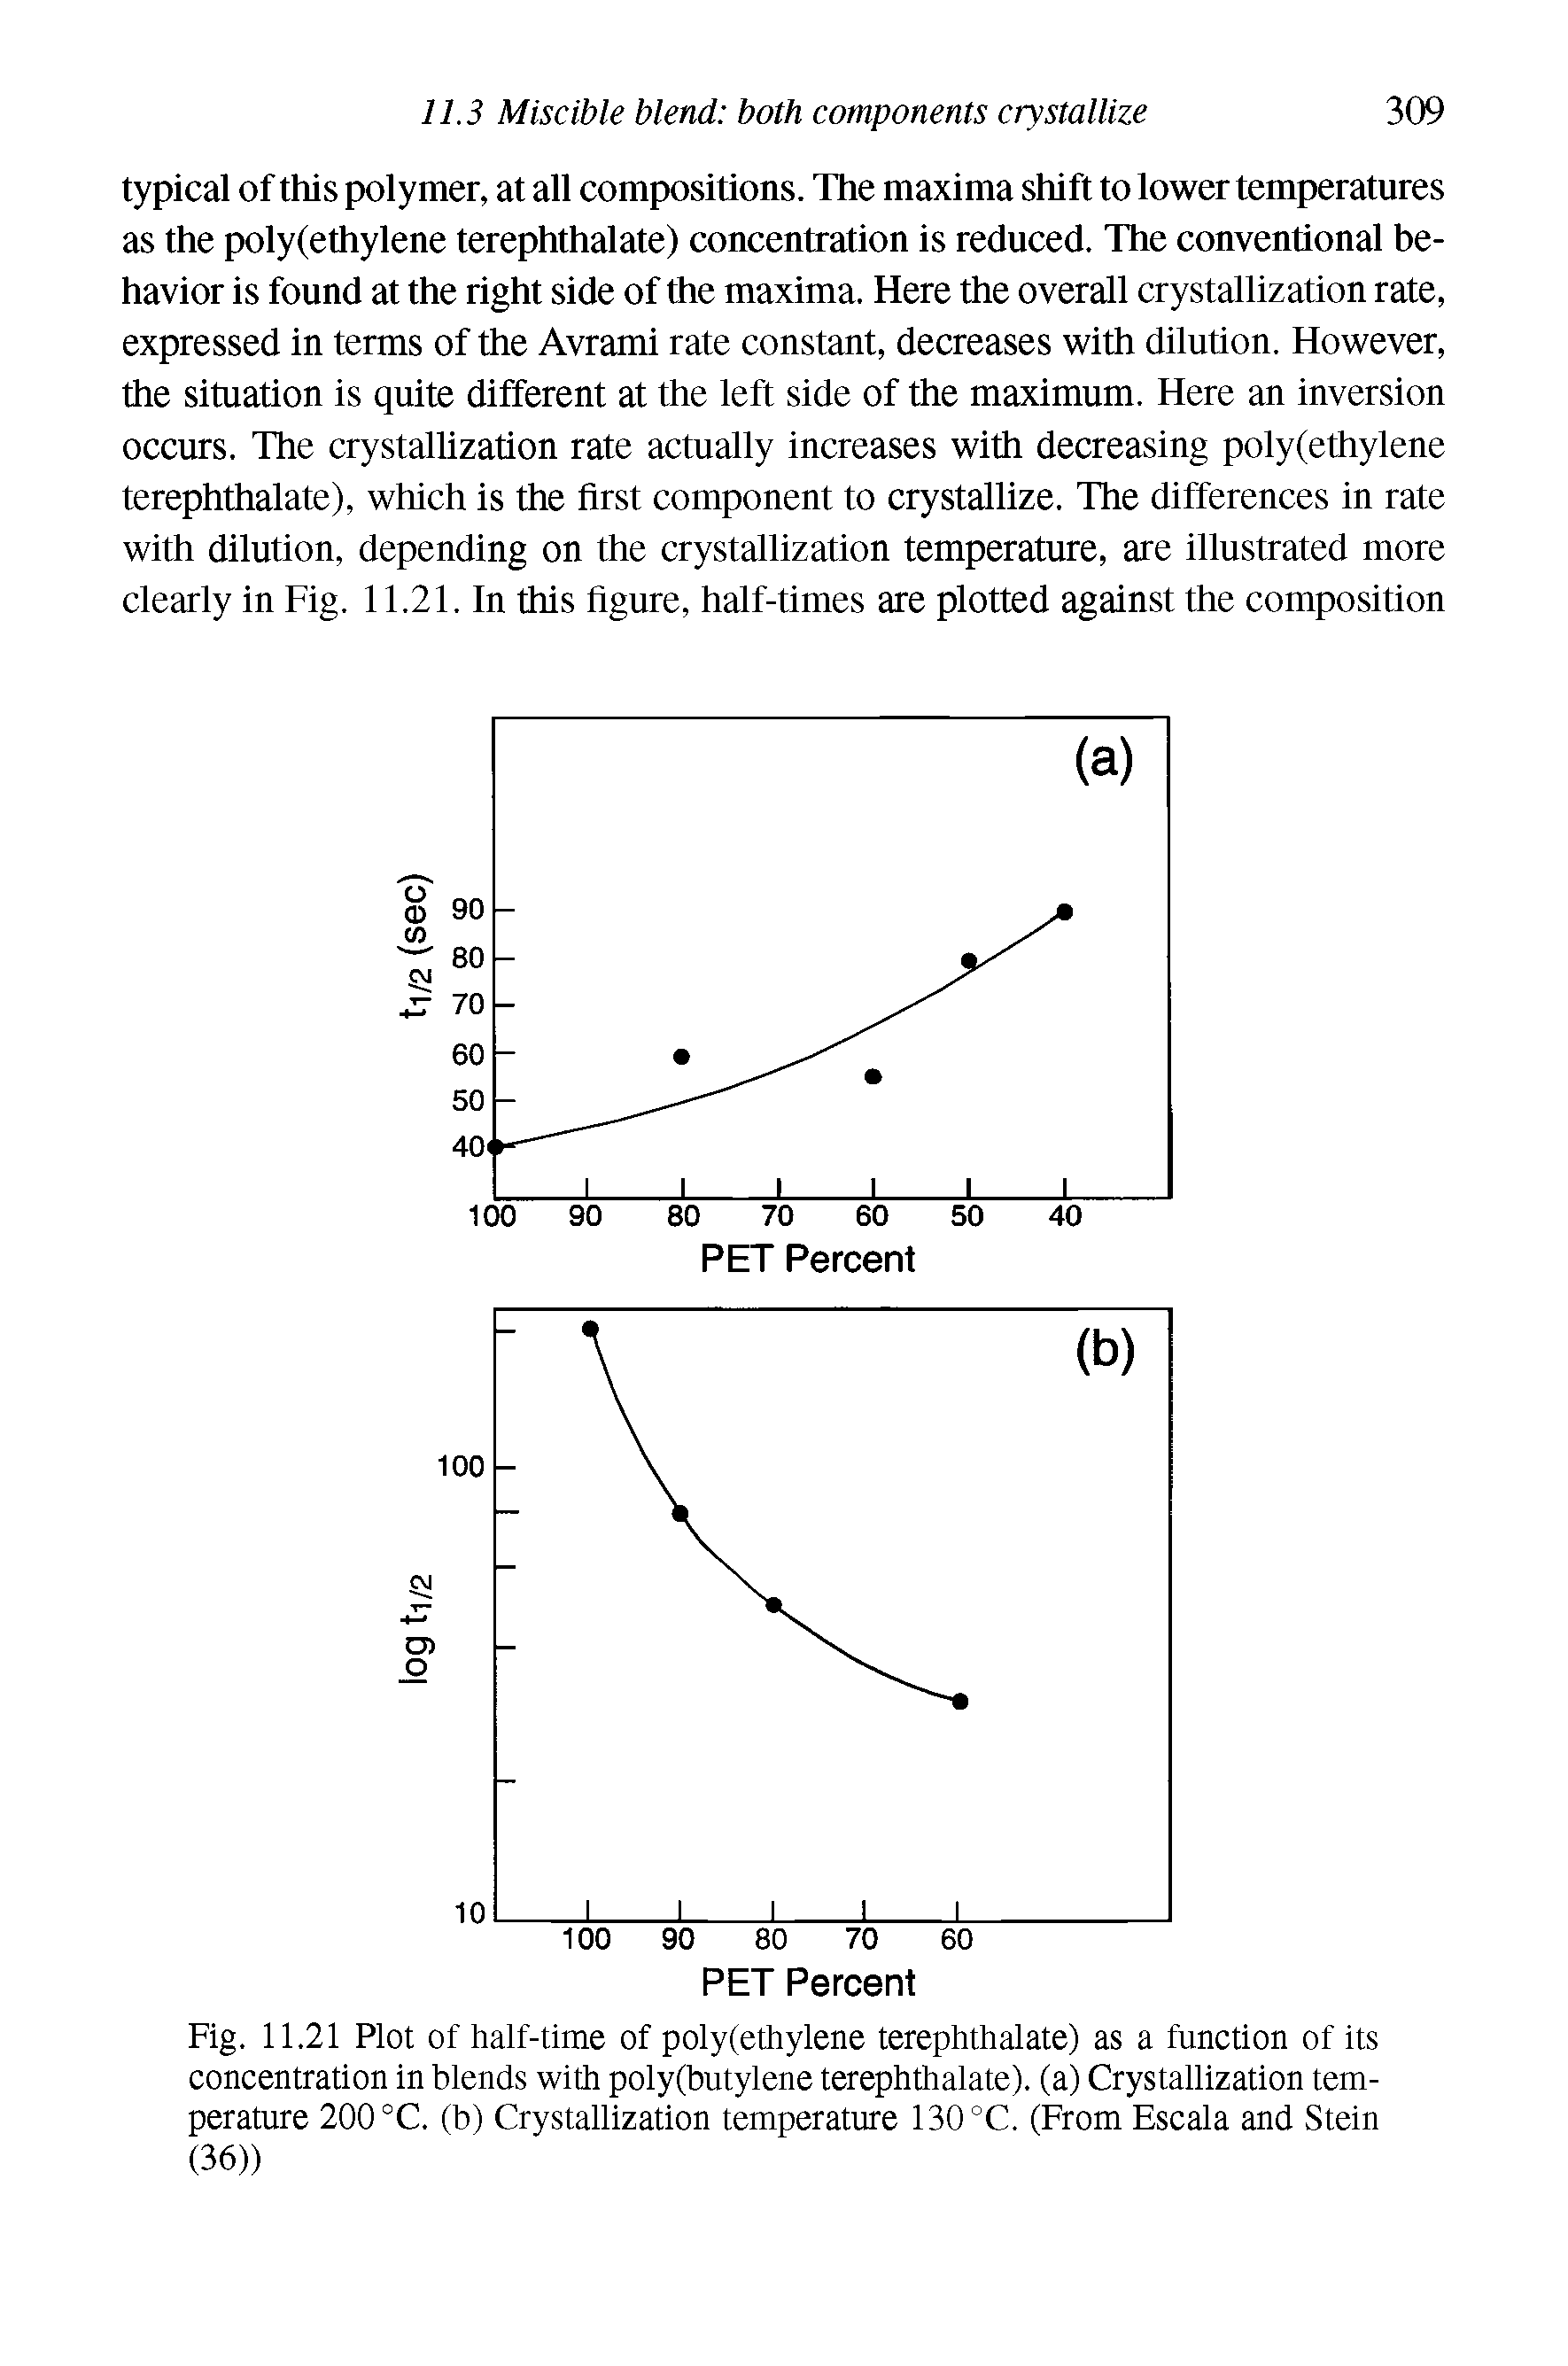 Fig. 11.21 Plot of half-time of polyfethylene terephthalate) as a function of its concentration in blends with poly(butylene terephthalate). (a) Crystallization temperature 200 °C. (b) Crystallization temperature 130 °C. (From Escala and Stein (36))...